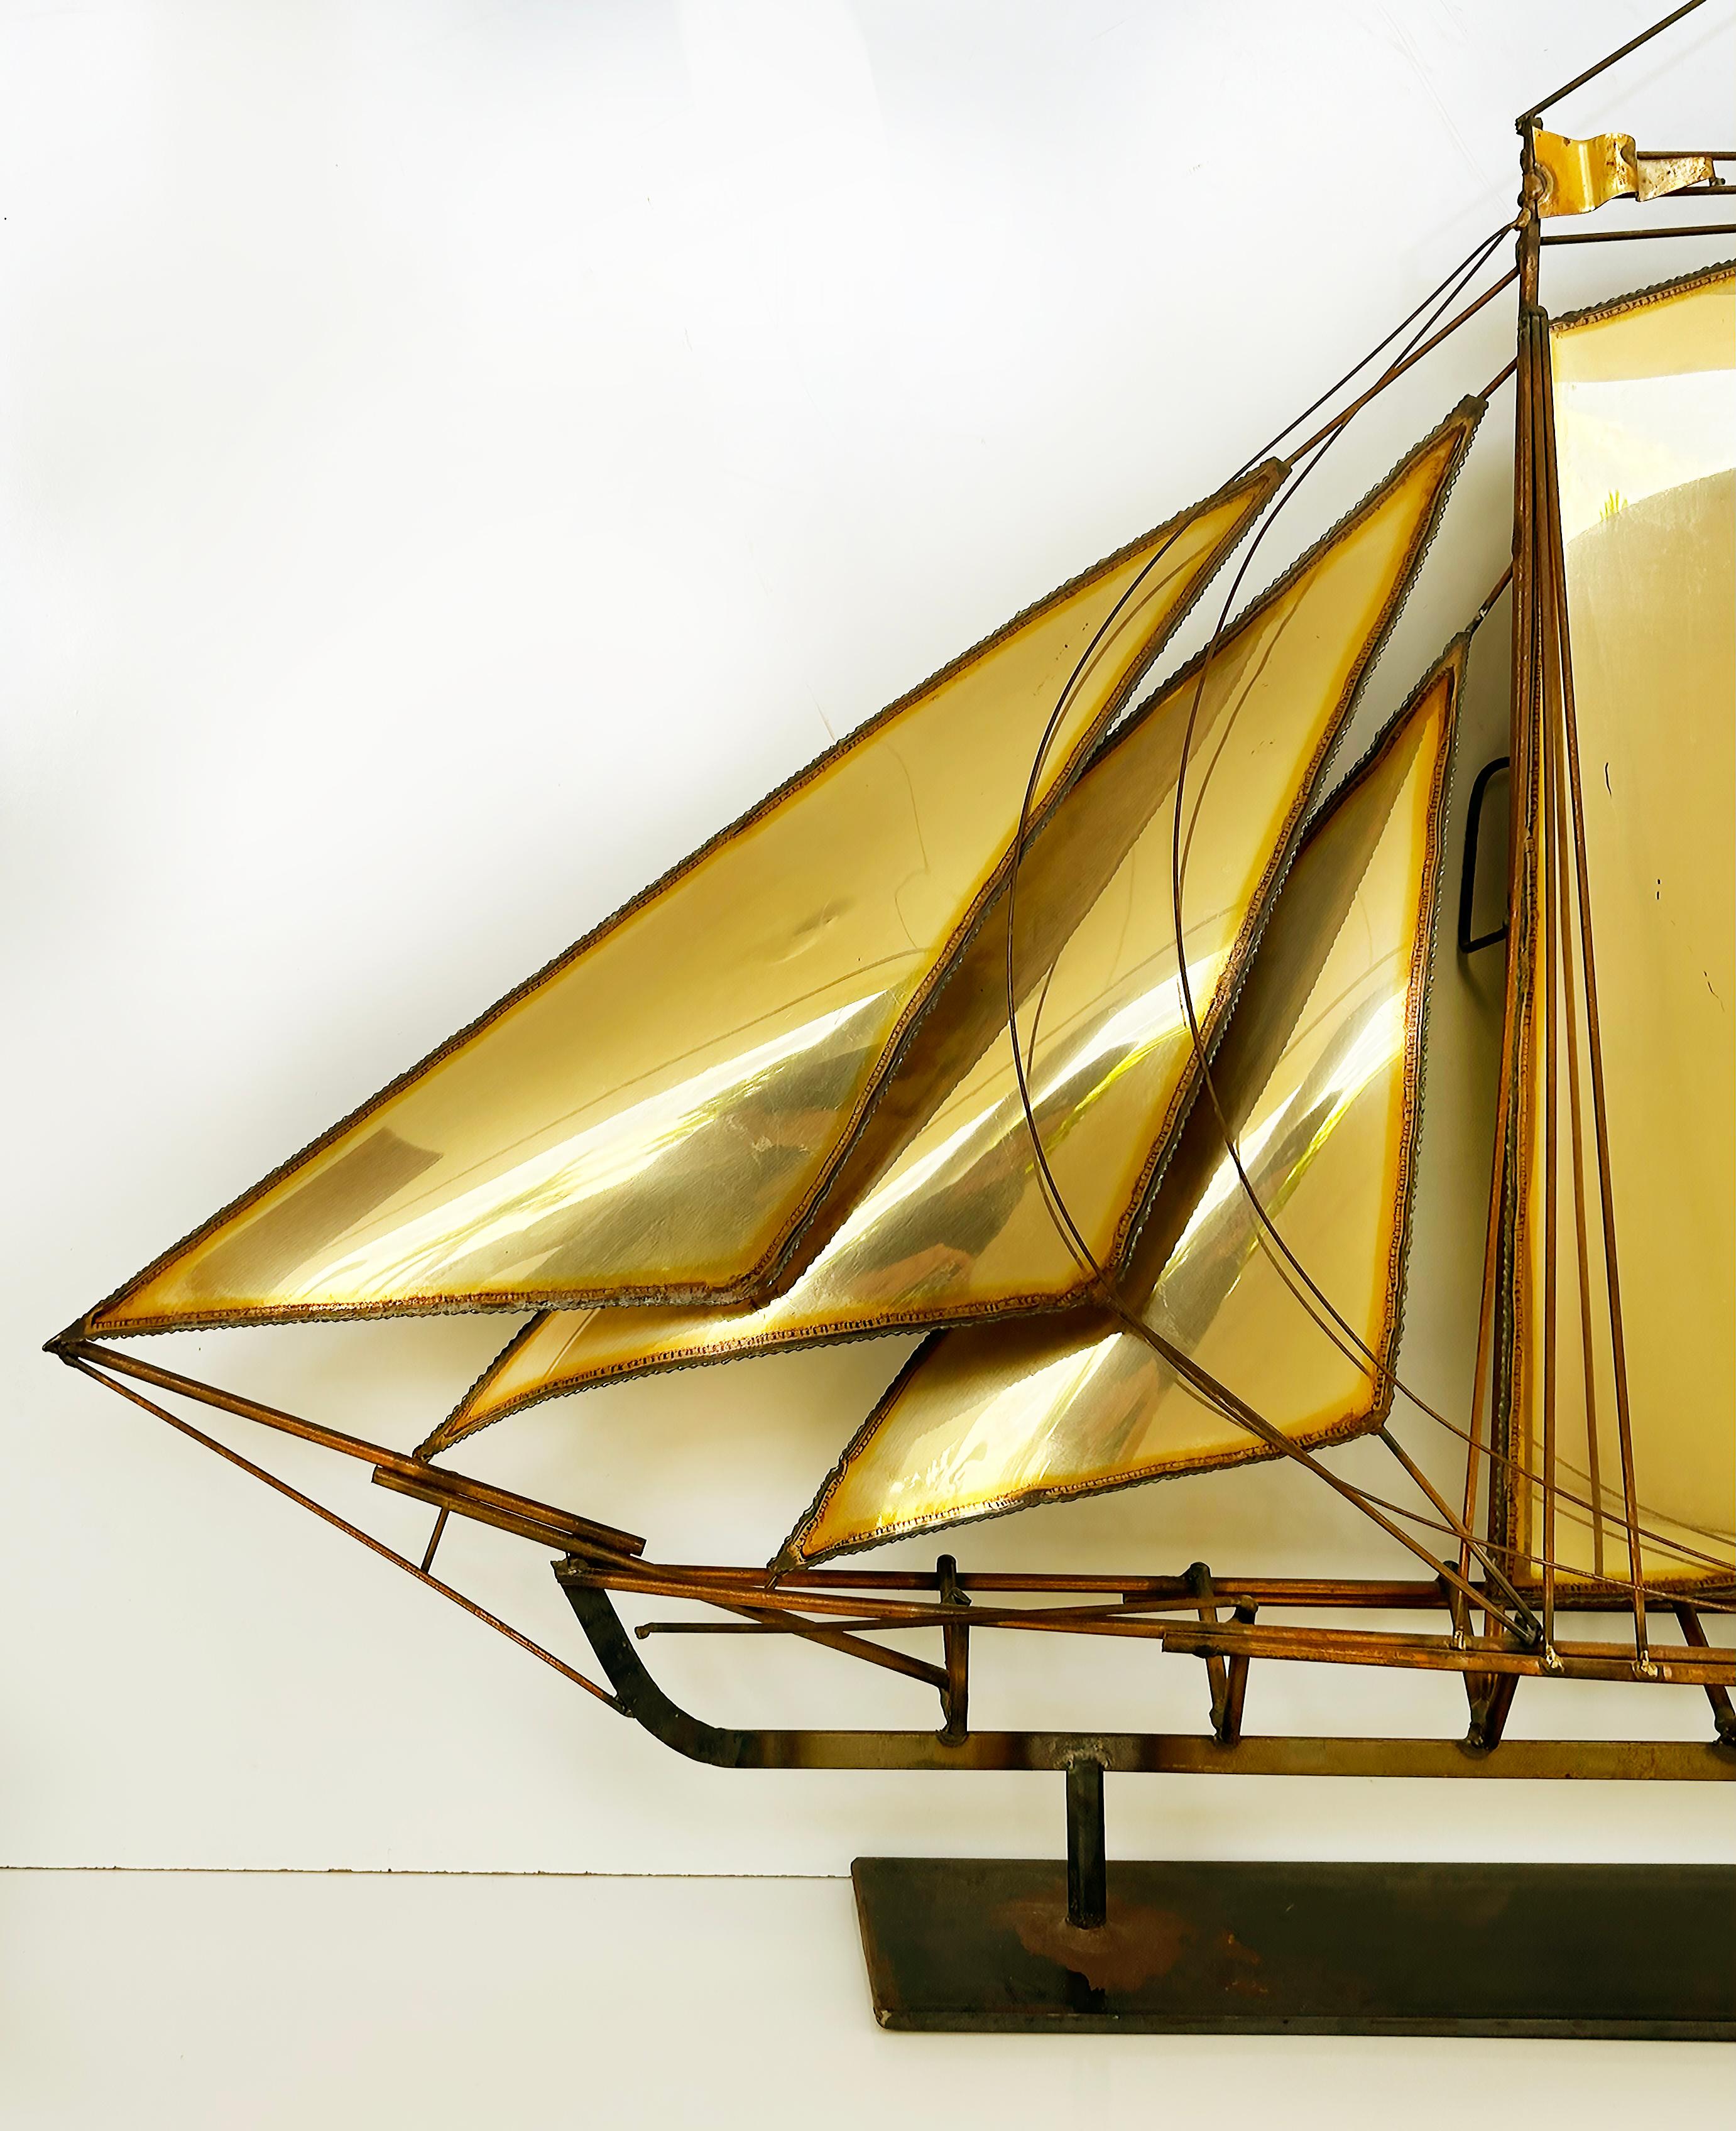 Brutalist John DeMott Large Sailboat Brass Sculpture Wall Sculpture

Offered for sale is a large and striking standing table-top sailboat nautical sculpture by the California artist John DeMott (1954-). The sculpture is in brass and can be viewed